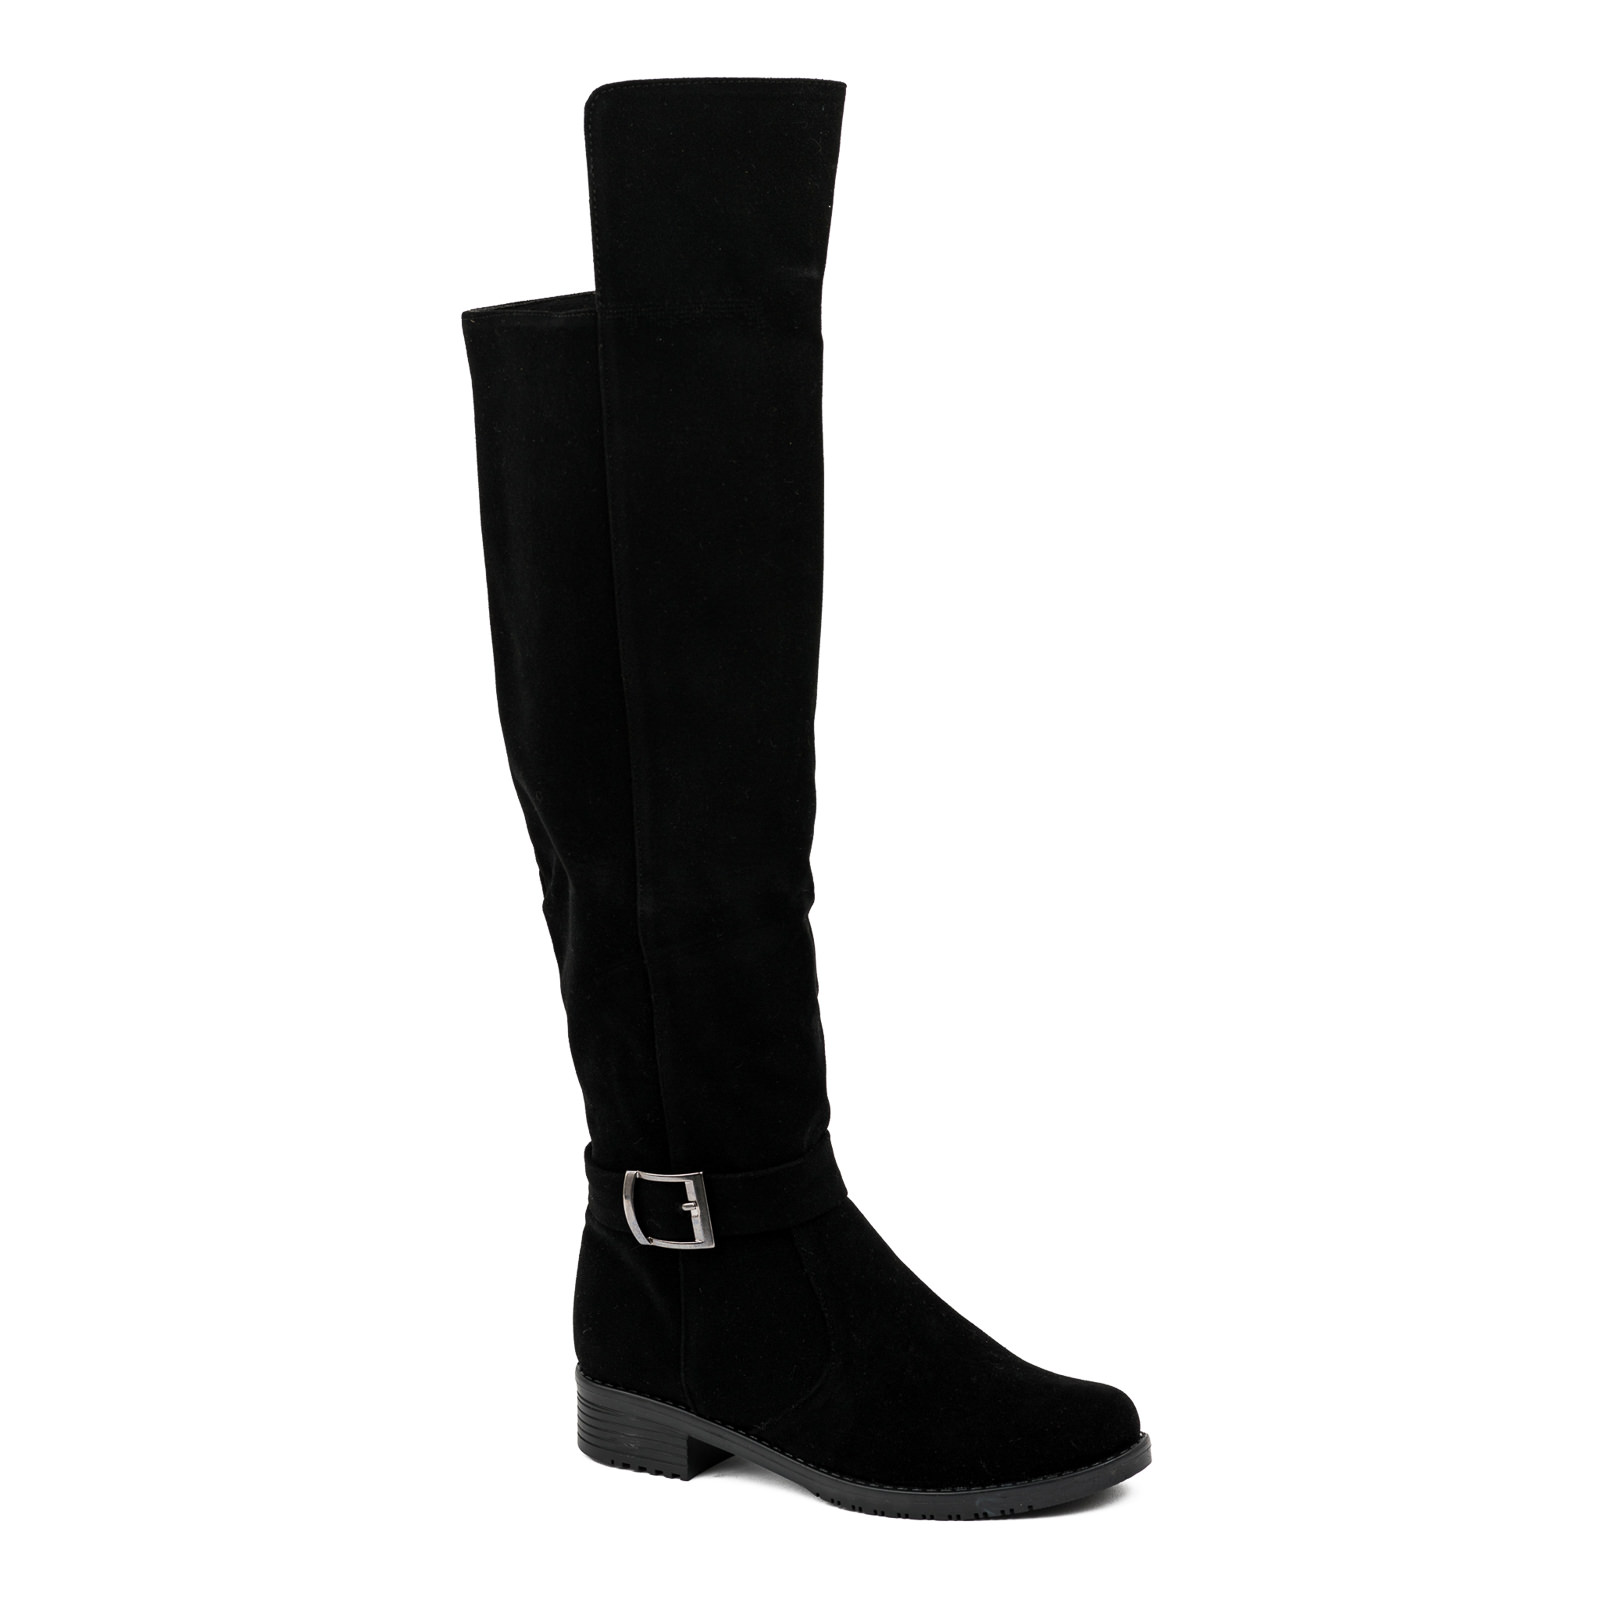 VELOUR HIGH BOOTS WITH BELTS - BLACK